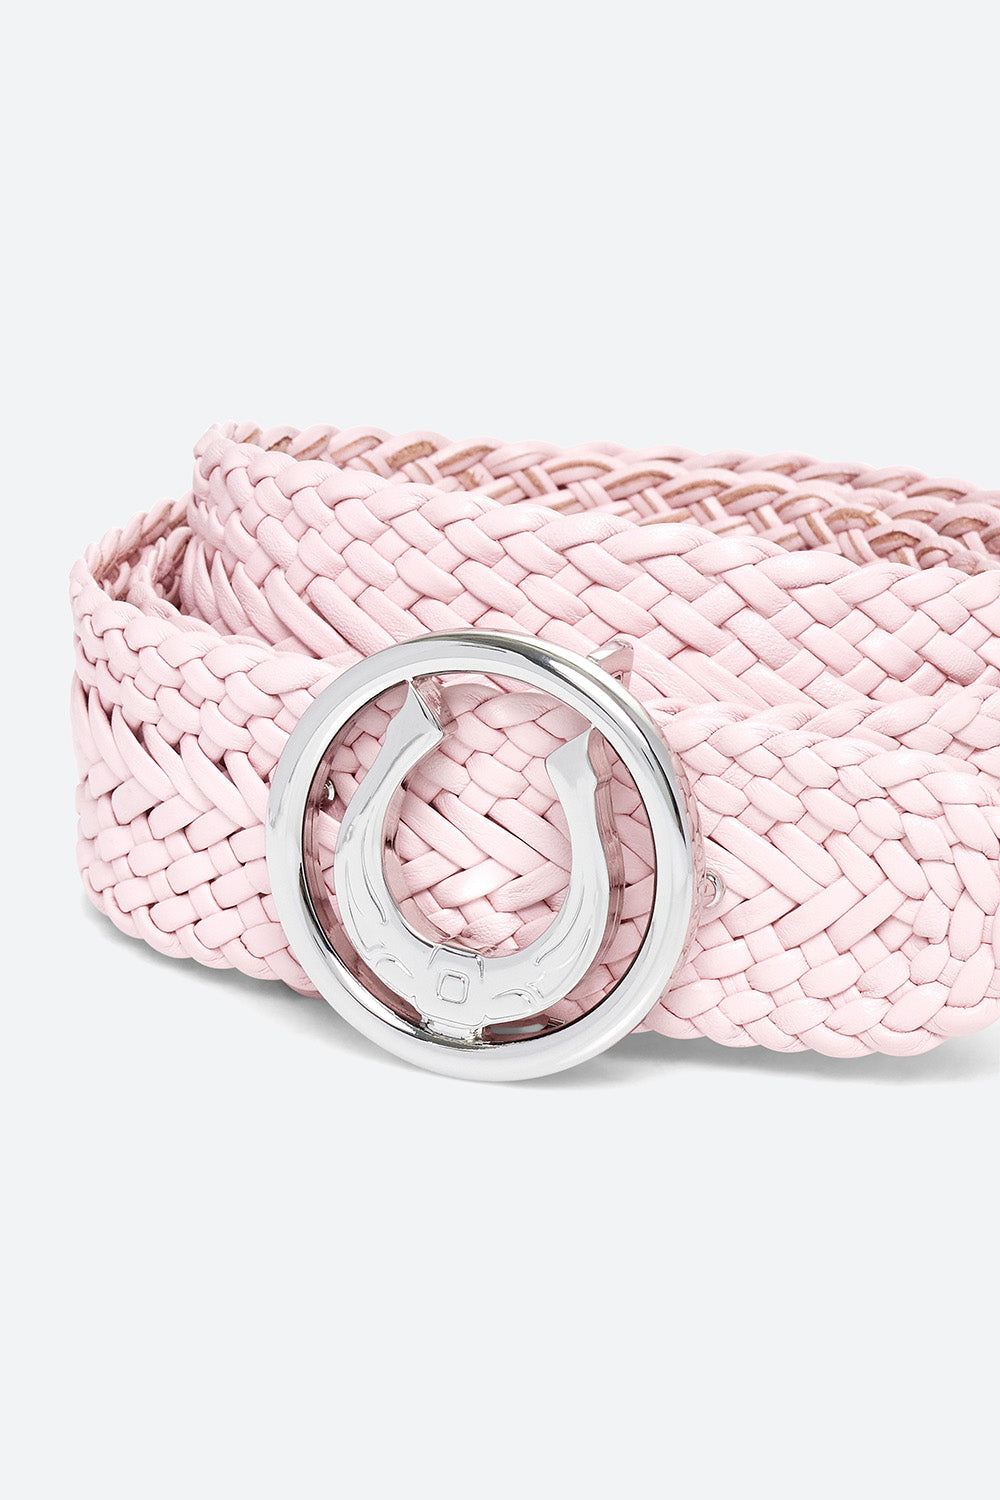 Men's Lucky Belt in Peony Pink, Polished Silver Horseshoe Buckle